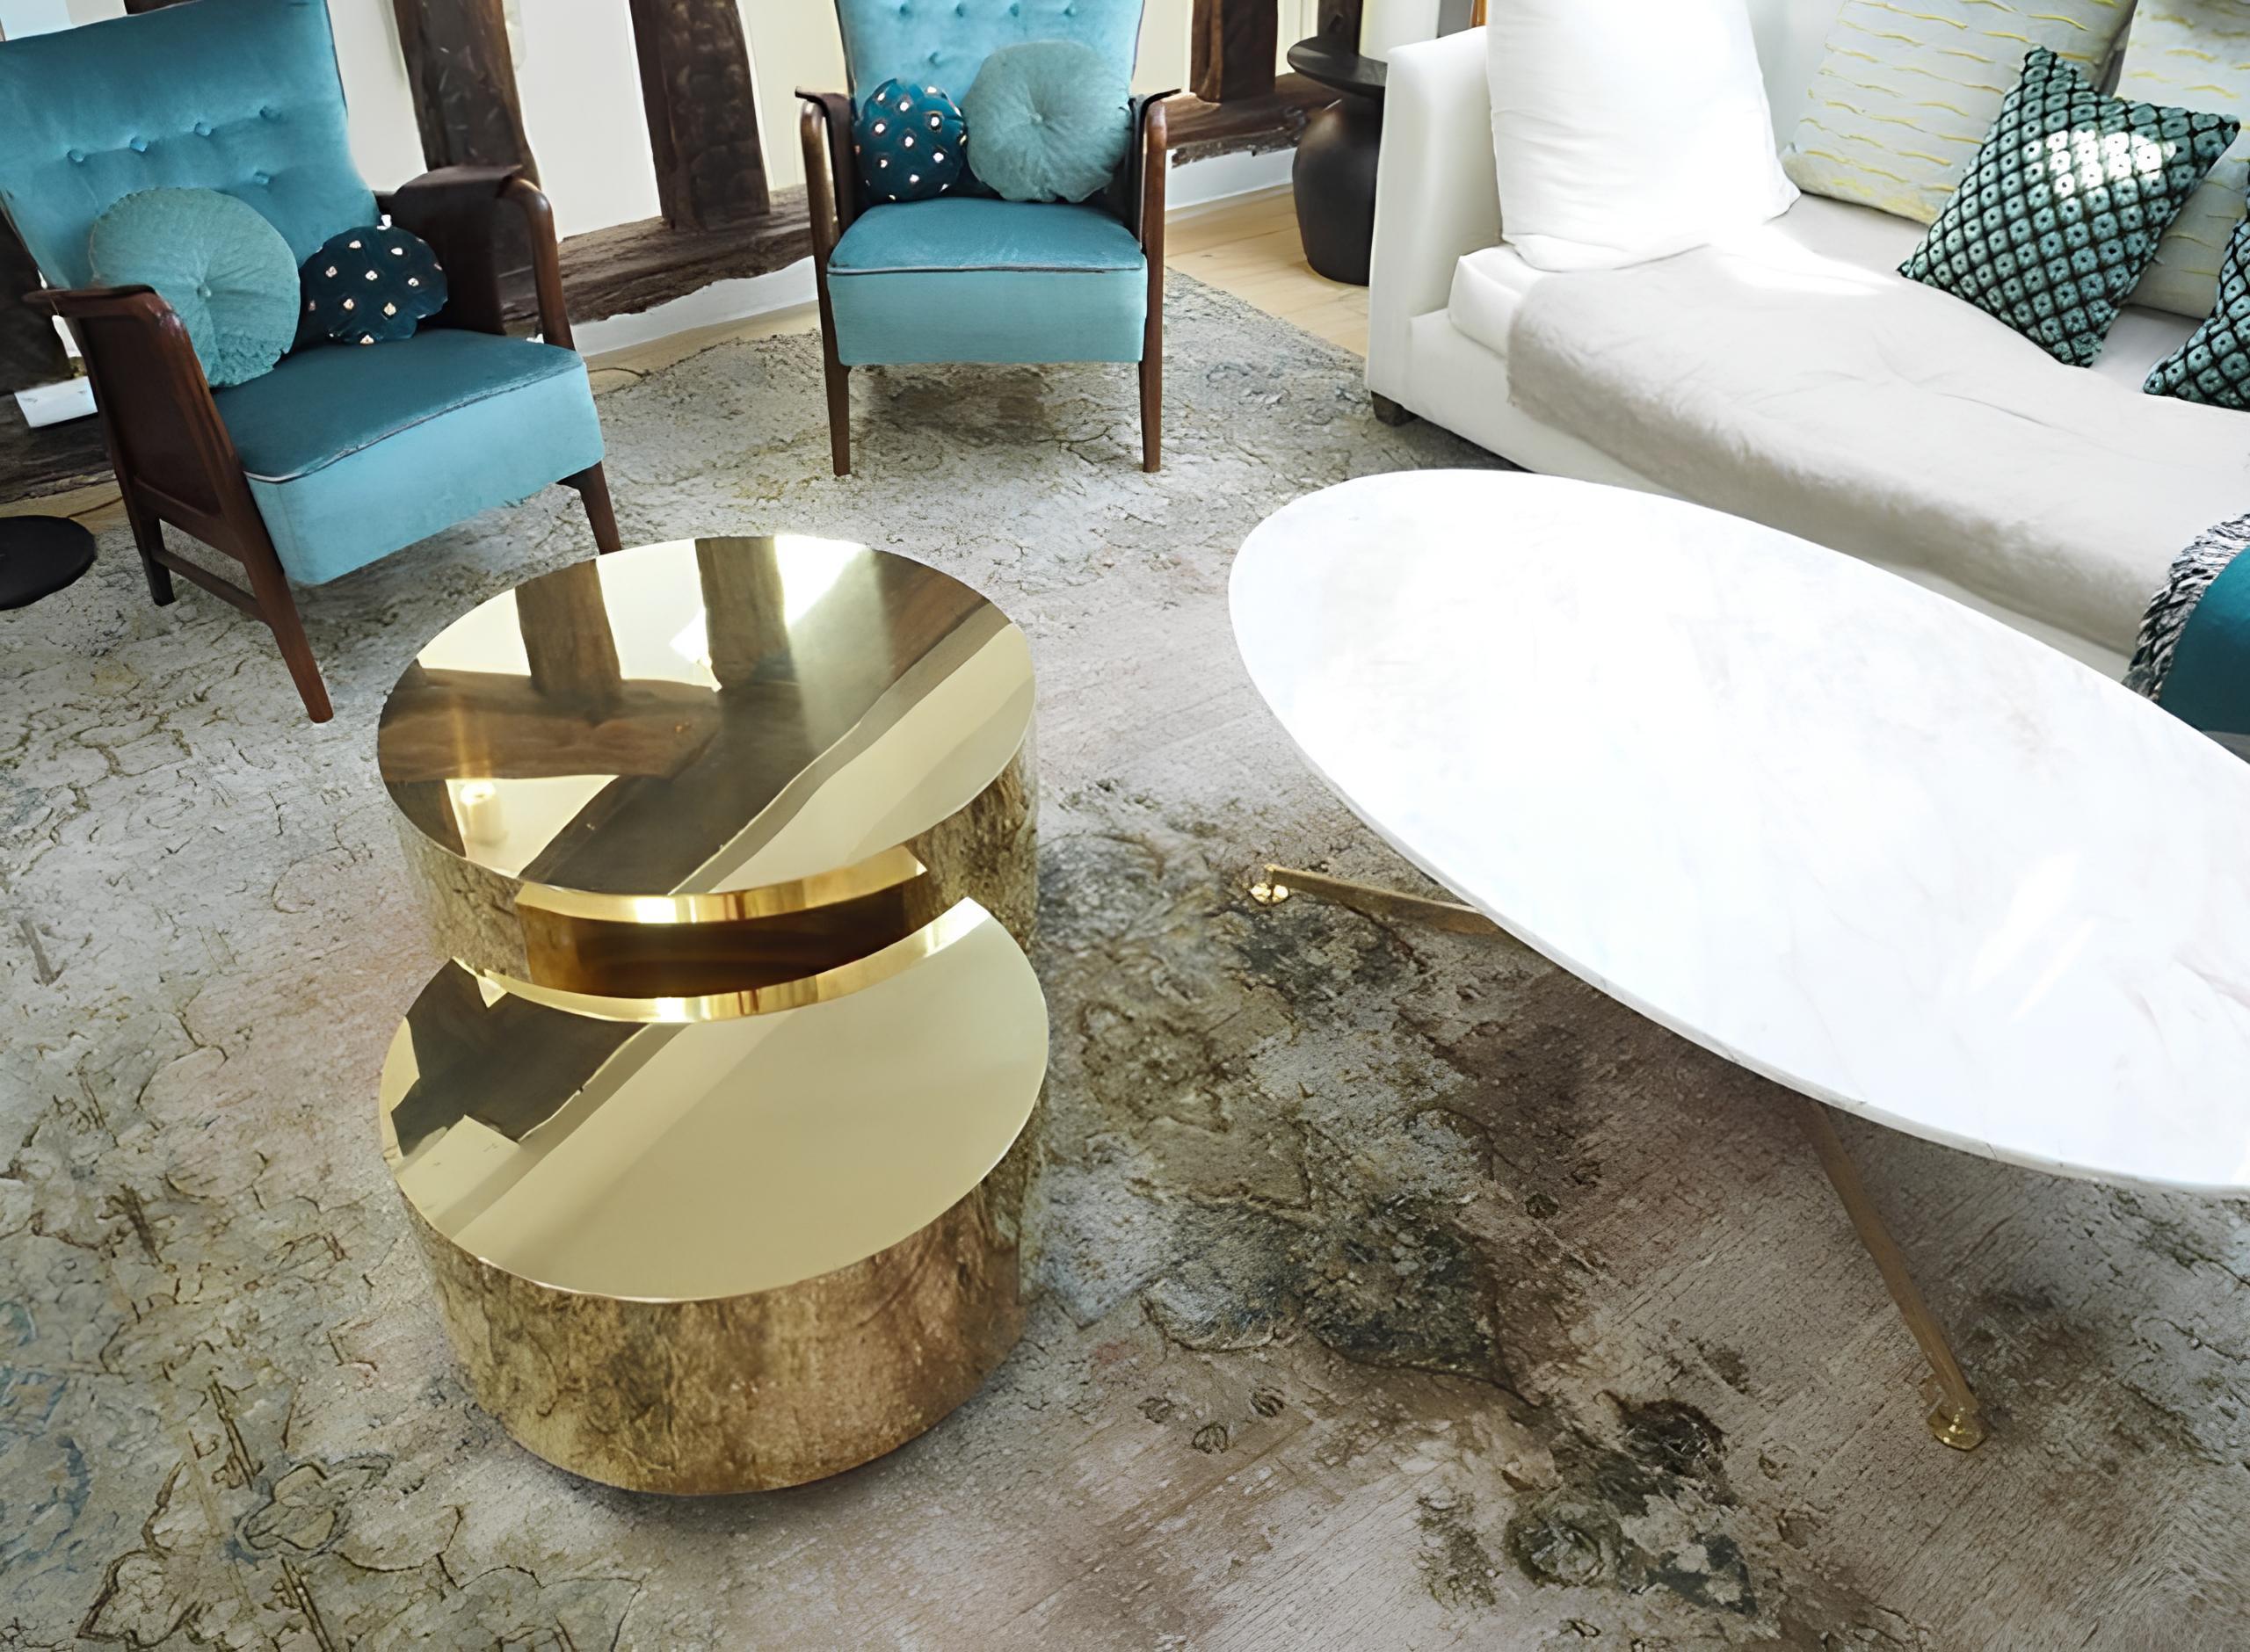 Luna Brass/Steel Collection - Coffee table / Side Tables / Auxiliary Tables

The Luna Brass/Steel Table Set, crafted in our Spanish workshop, is fashioned entirely from satin brass or steel, seamlessly blending the grace of full and half moon shapes